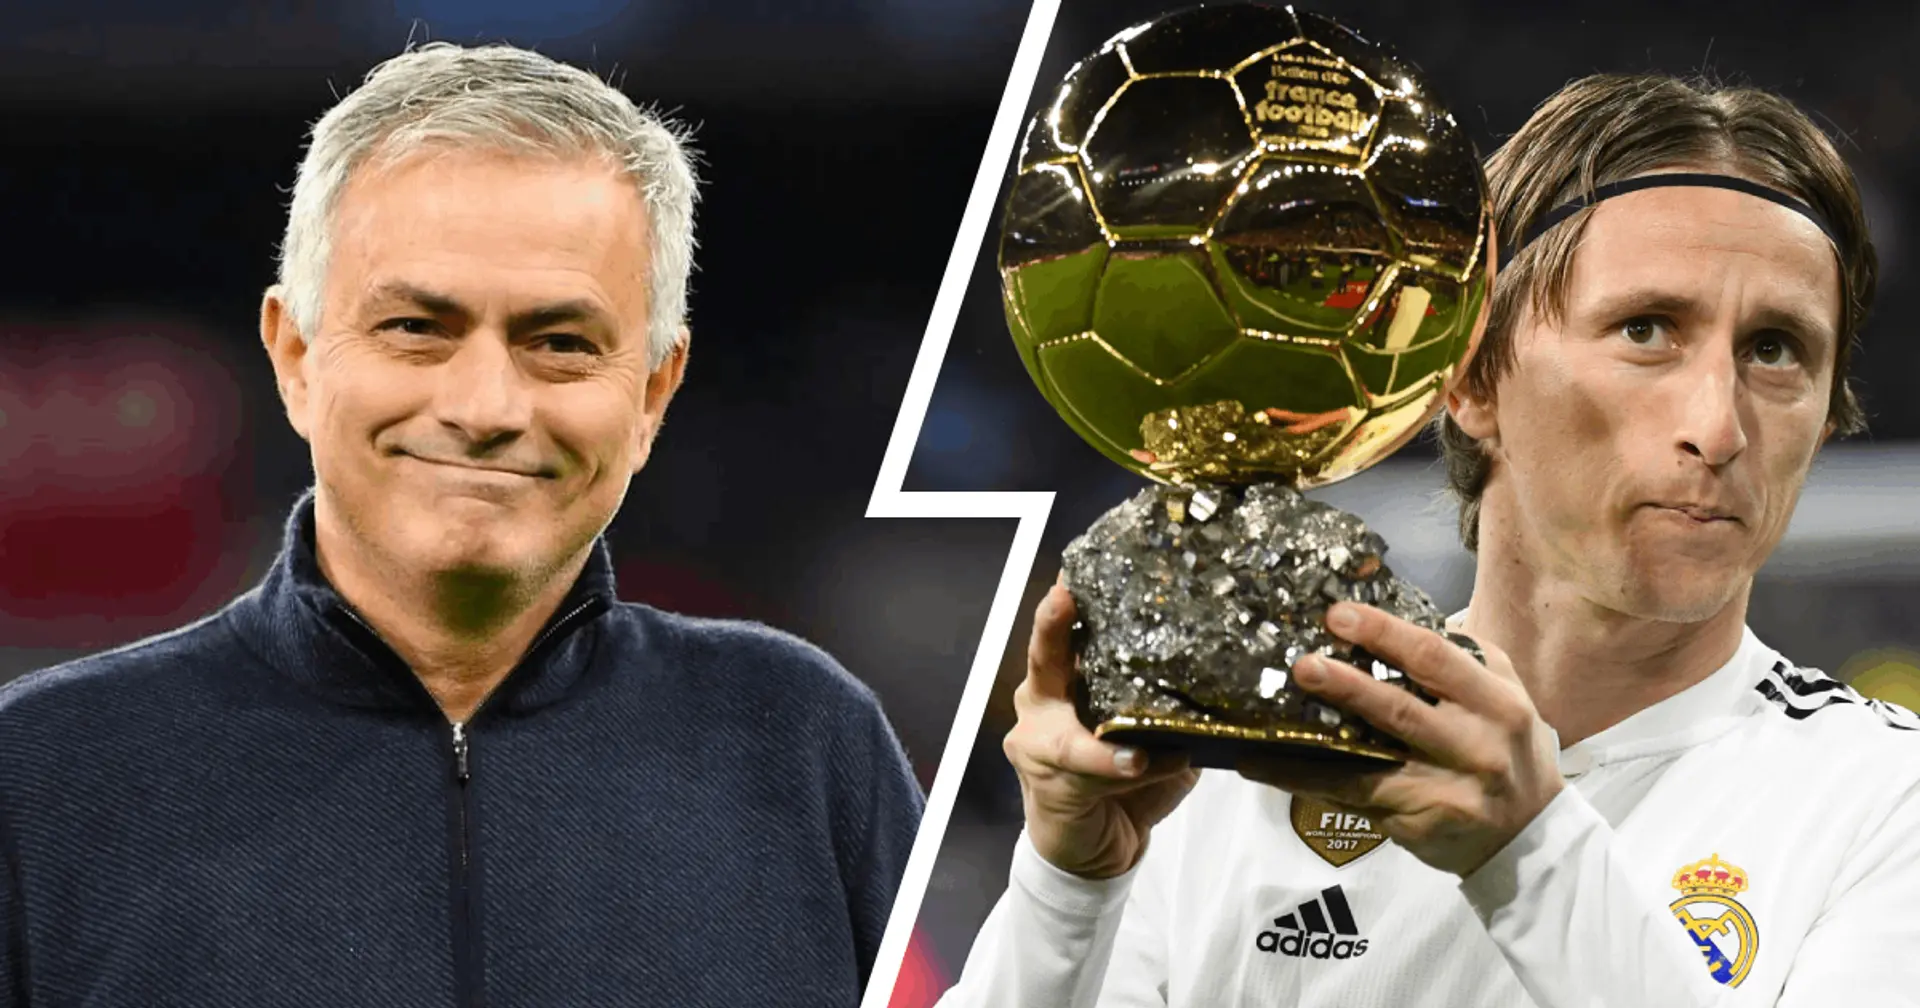 'When someone can make history in what they do they become immortal': Mourinho says Ballon d'Or winner Modric is 'beyond compare'